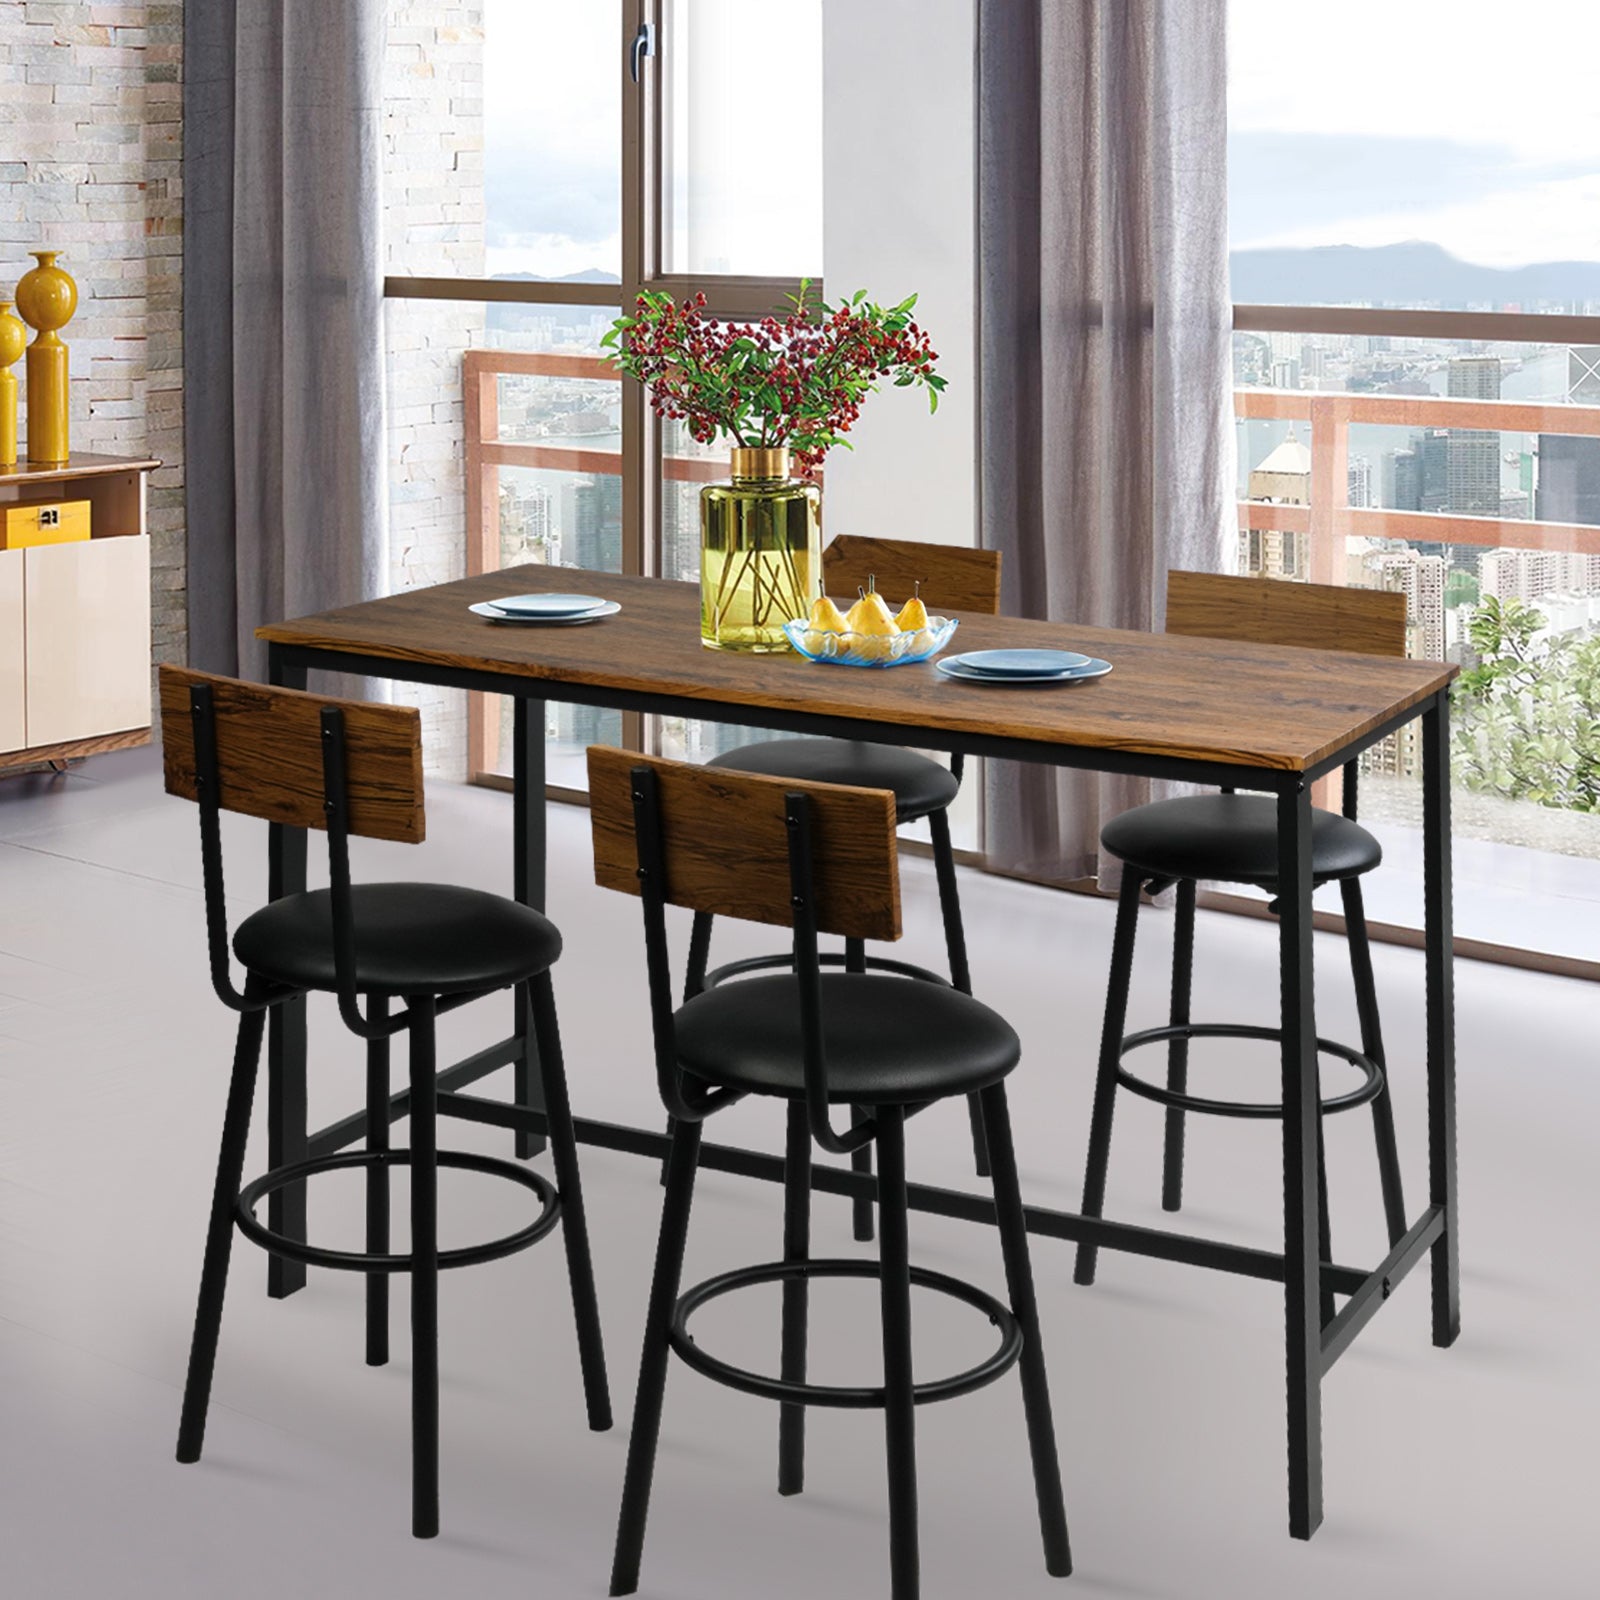 5 Piece Dining Bar Table Set, 1 Bar Table 47.3" for 4 with 4 Upholstered Bar Stools